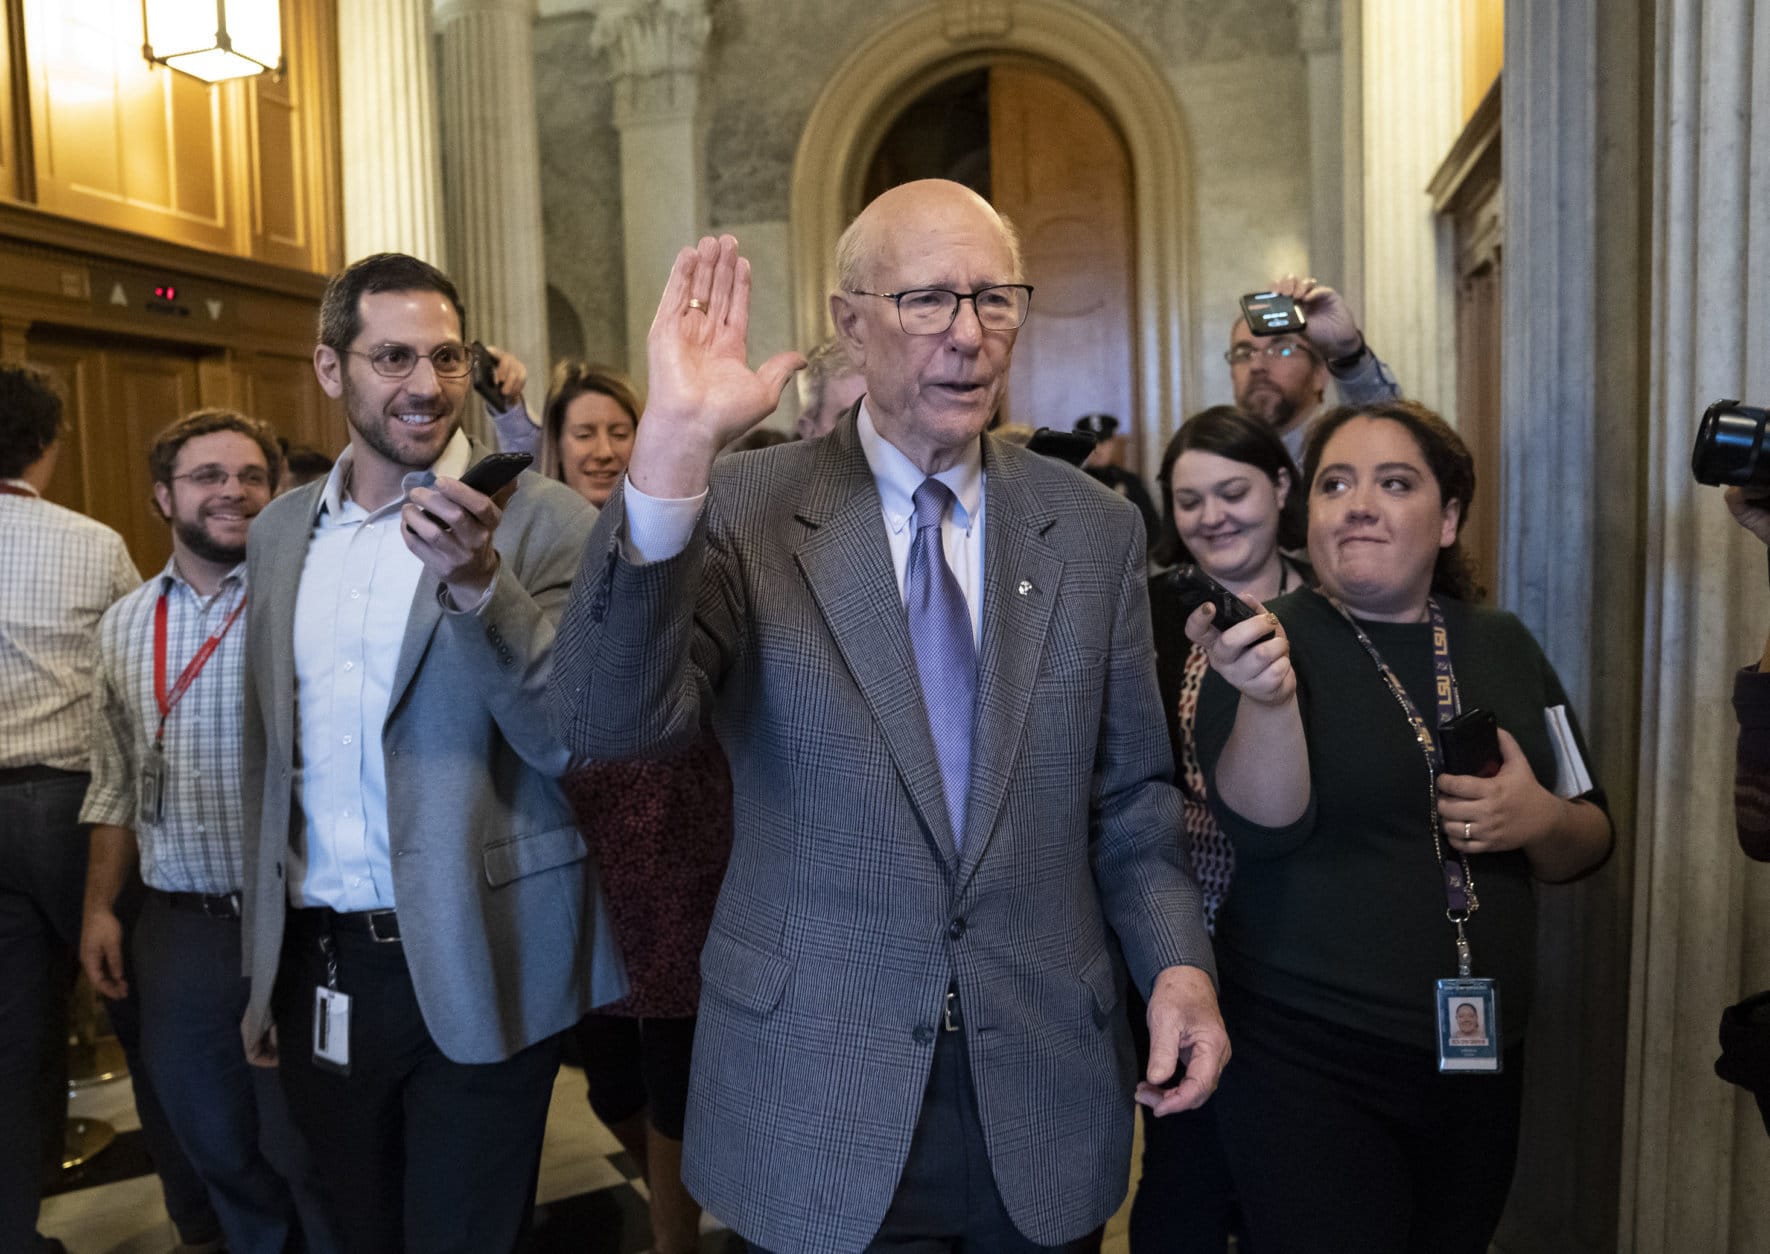 With reporters seeking comment, Republican Senator Pat Roberts of Kansas, chairman of the Senate Agriculture Committee, departs after he opened and closed a brief session of the U.S. Senate amid the partial government shutdown, at the Capitol in Washington, Thursday, Dec. 27, 2018. (AP Photo/J. Scott Applewhite)